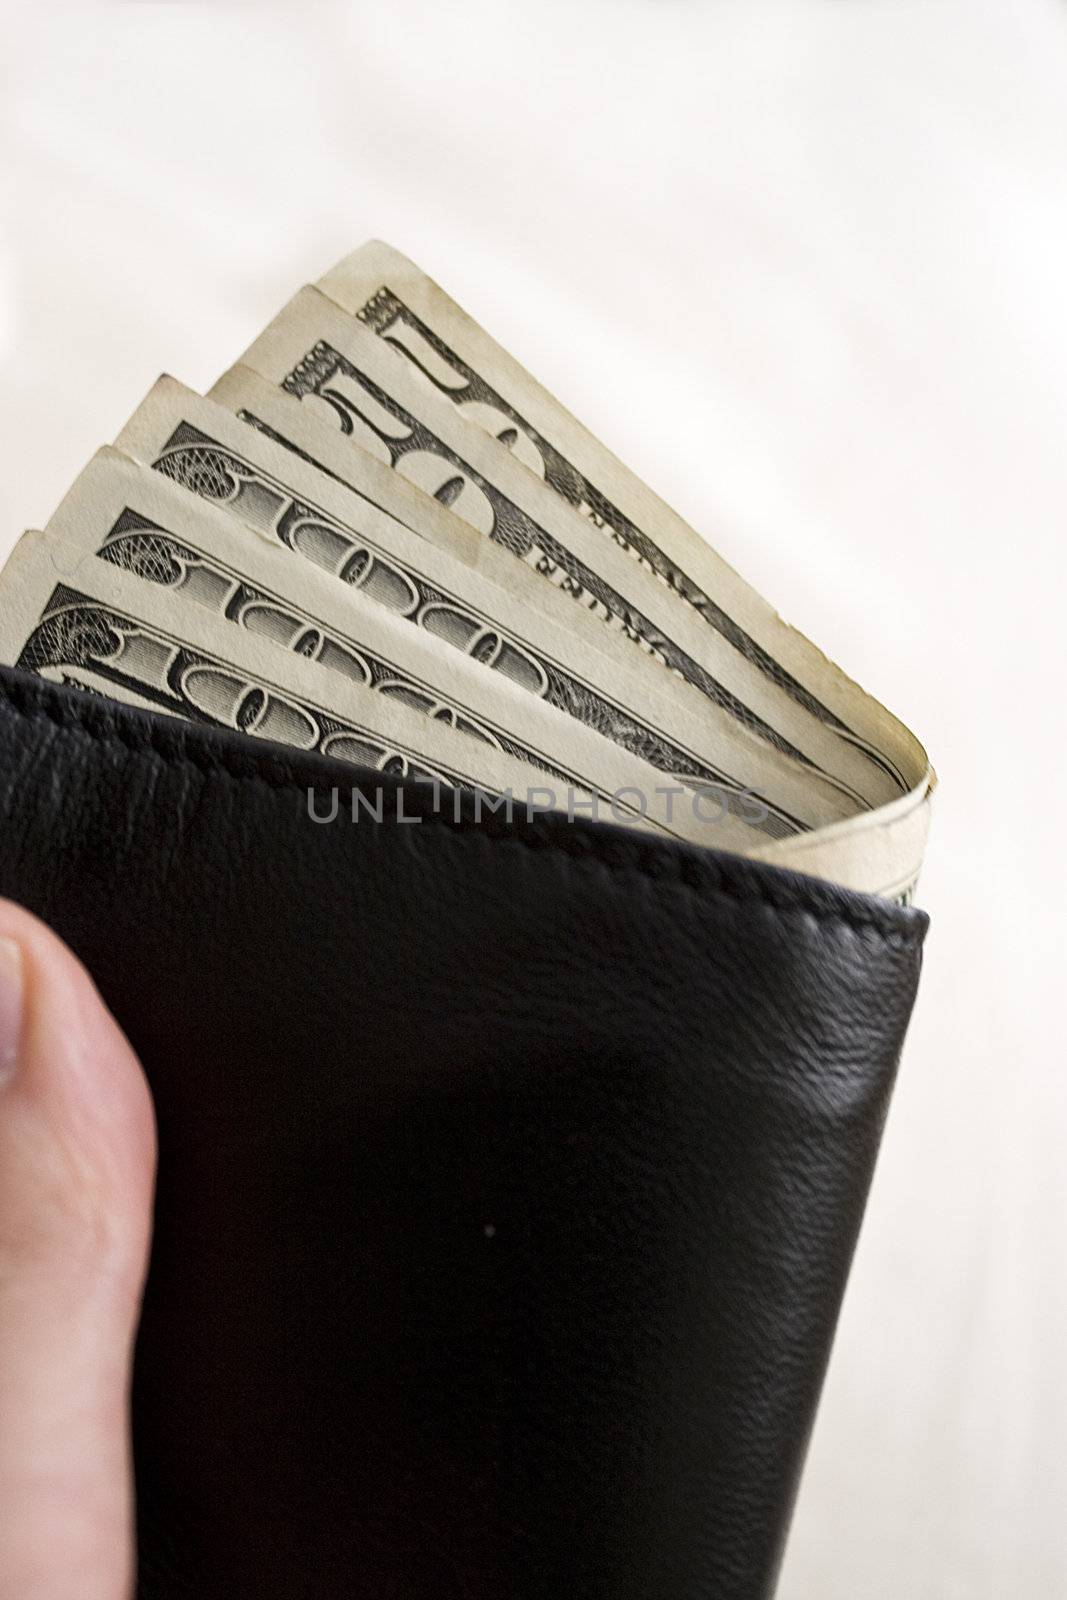 A hand holding a wallet full of cash isolated over a gold background.